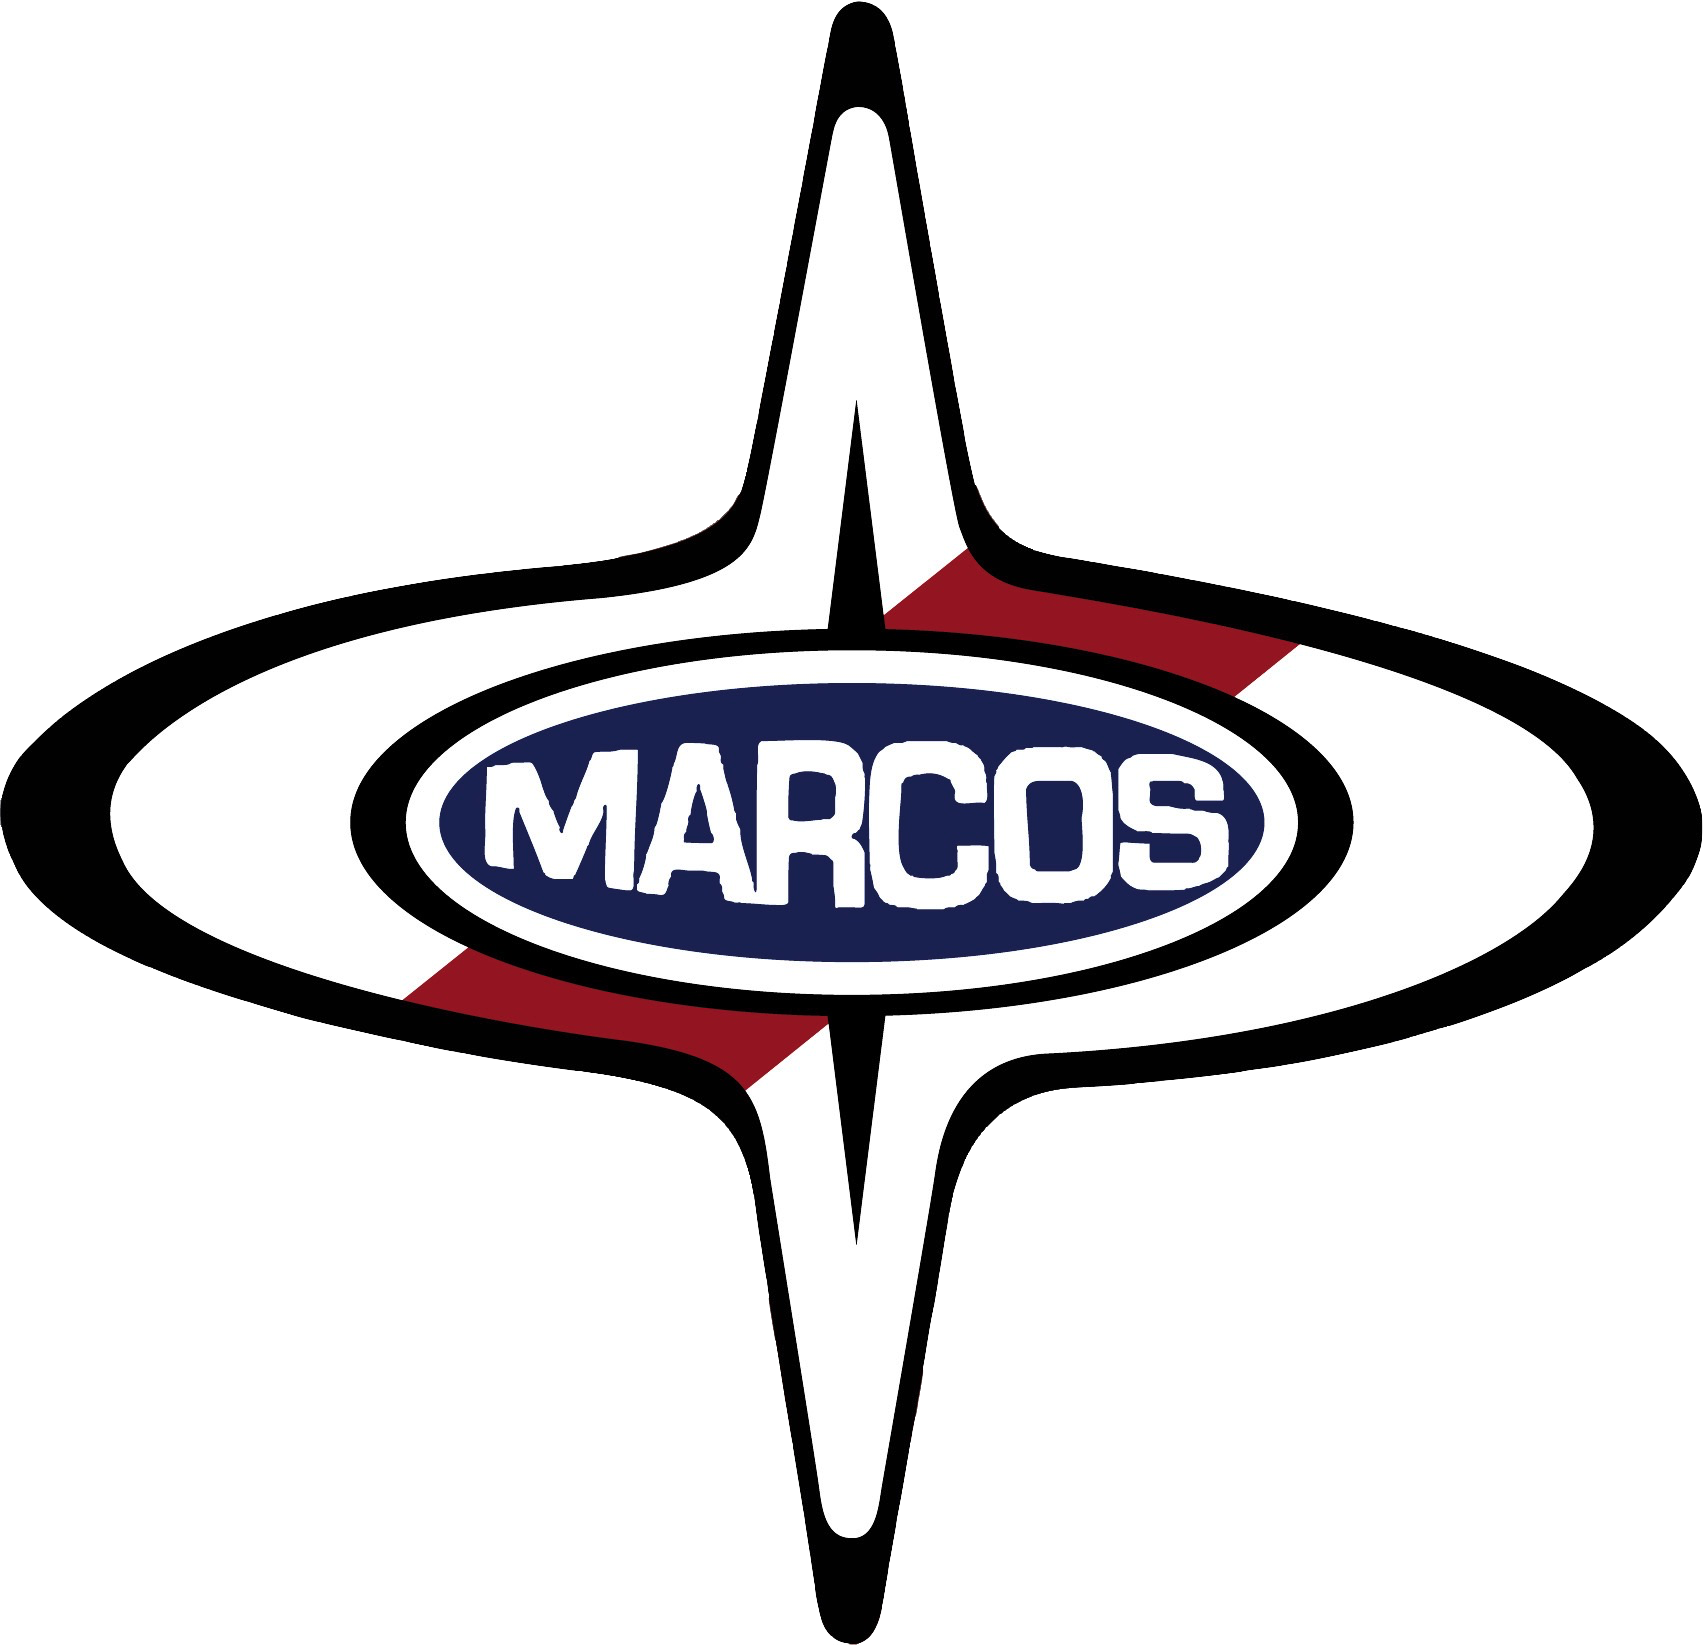 Marcos Advisory | Your Financial Advisors and Tax Accountants in Sydney